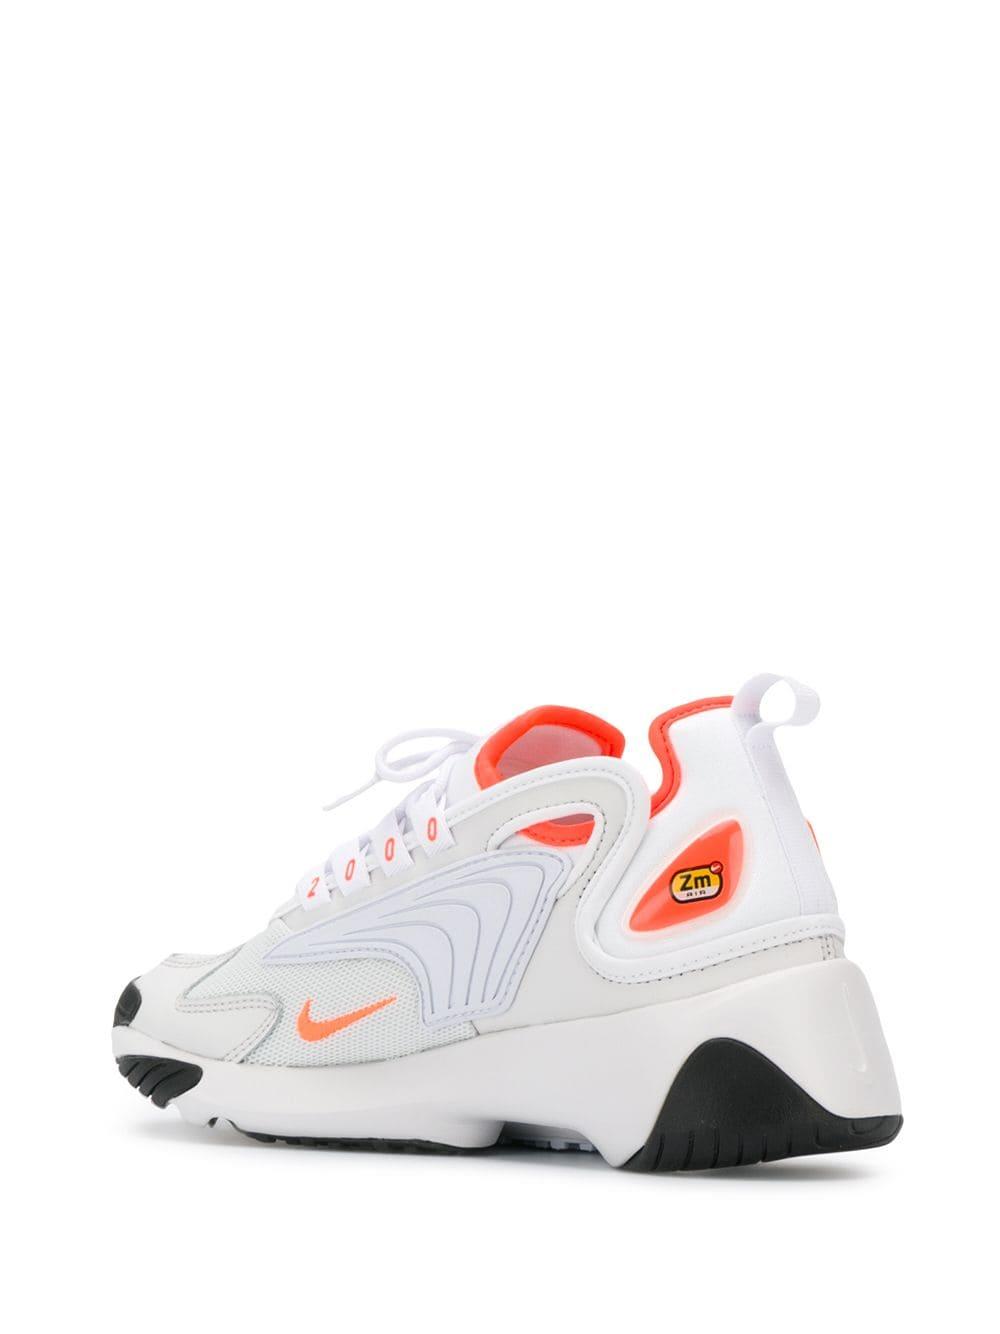 Nike Off-white And Orange Zoom 2k Sneakers | Lyst